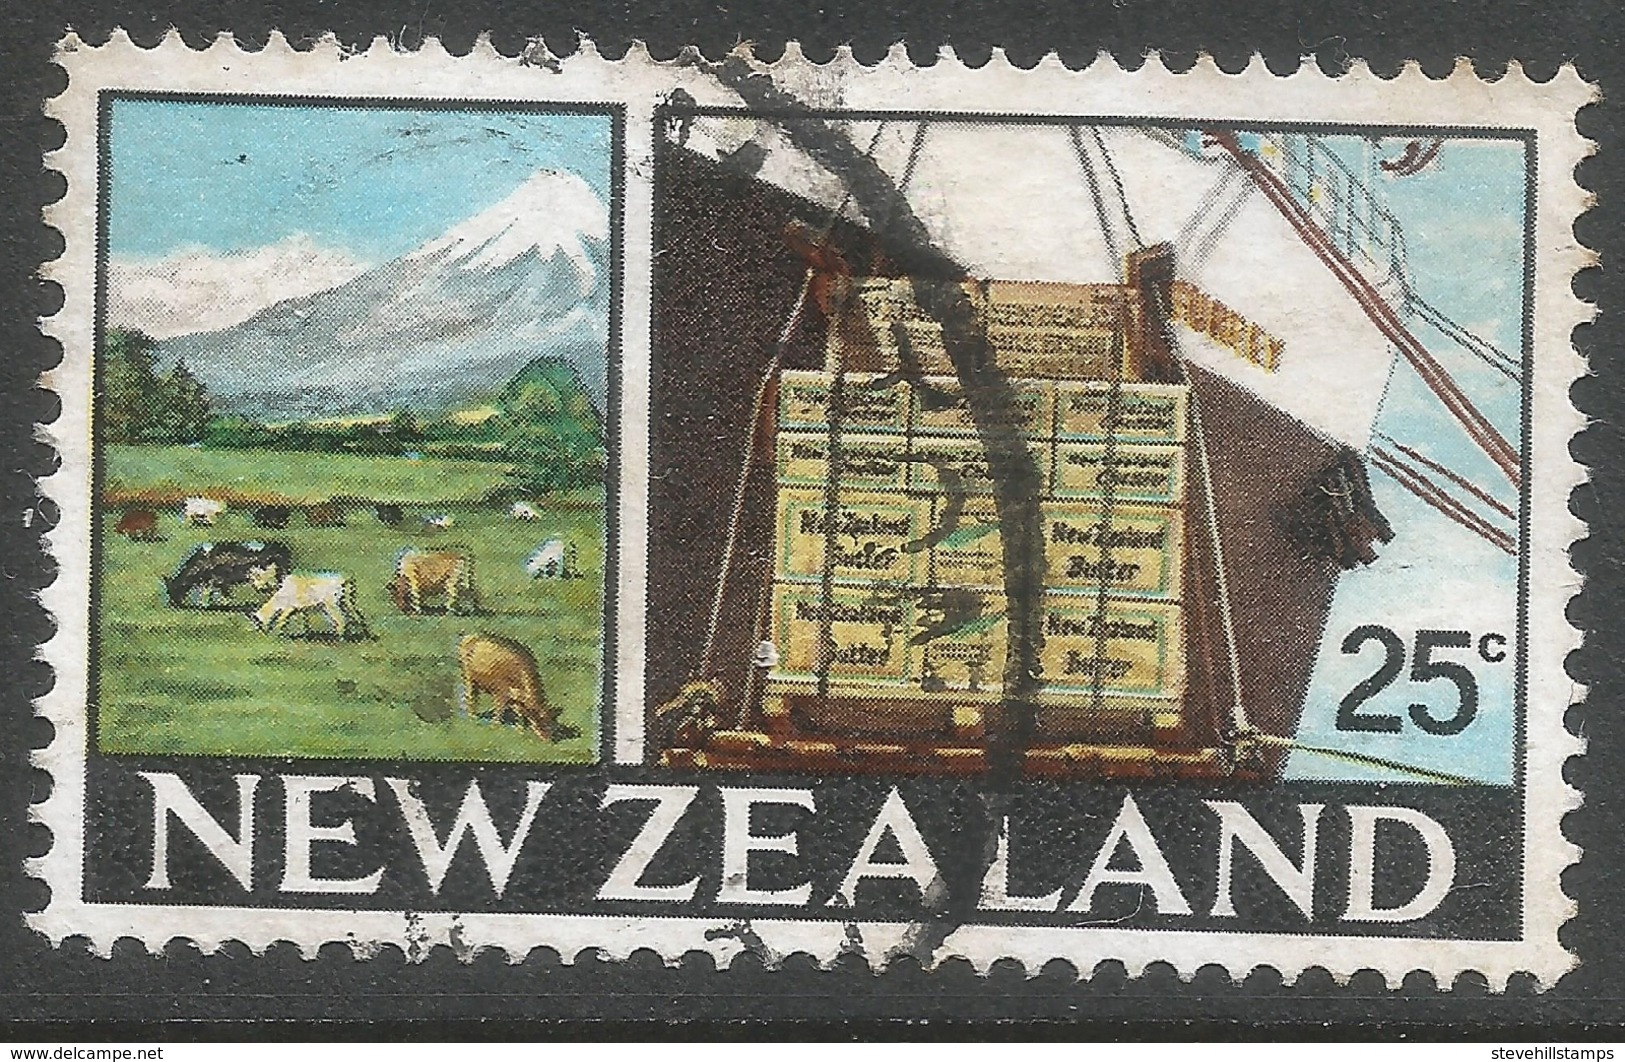 New Zealand. 1967-70 Definitives. 25c Used. SG 877 - Used Stamps